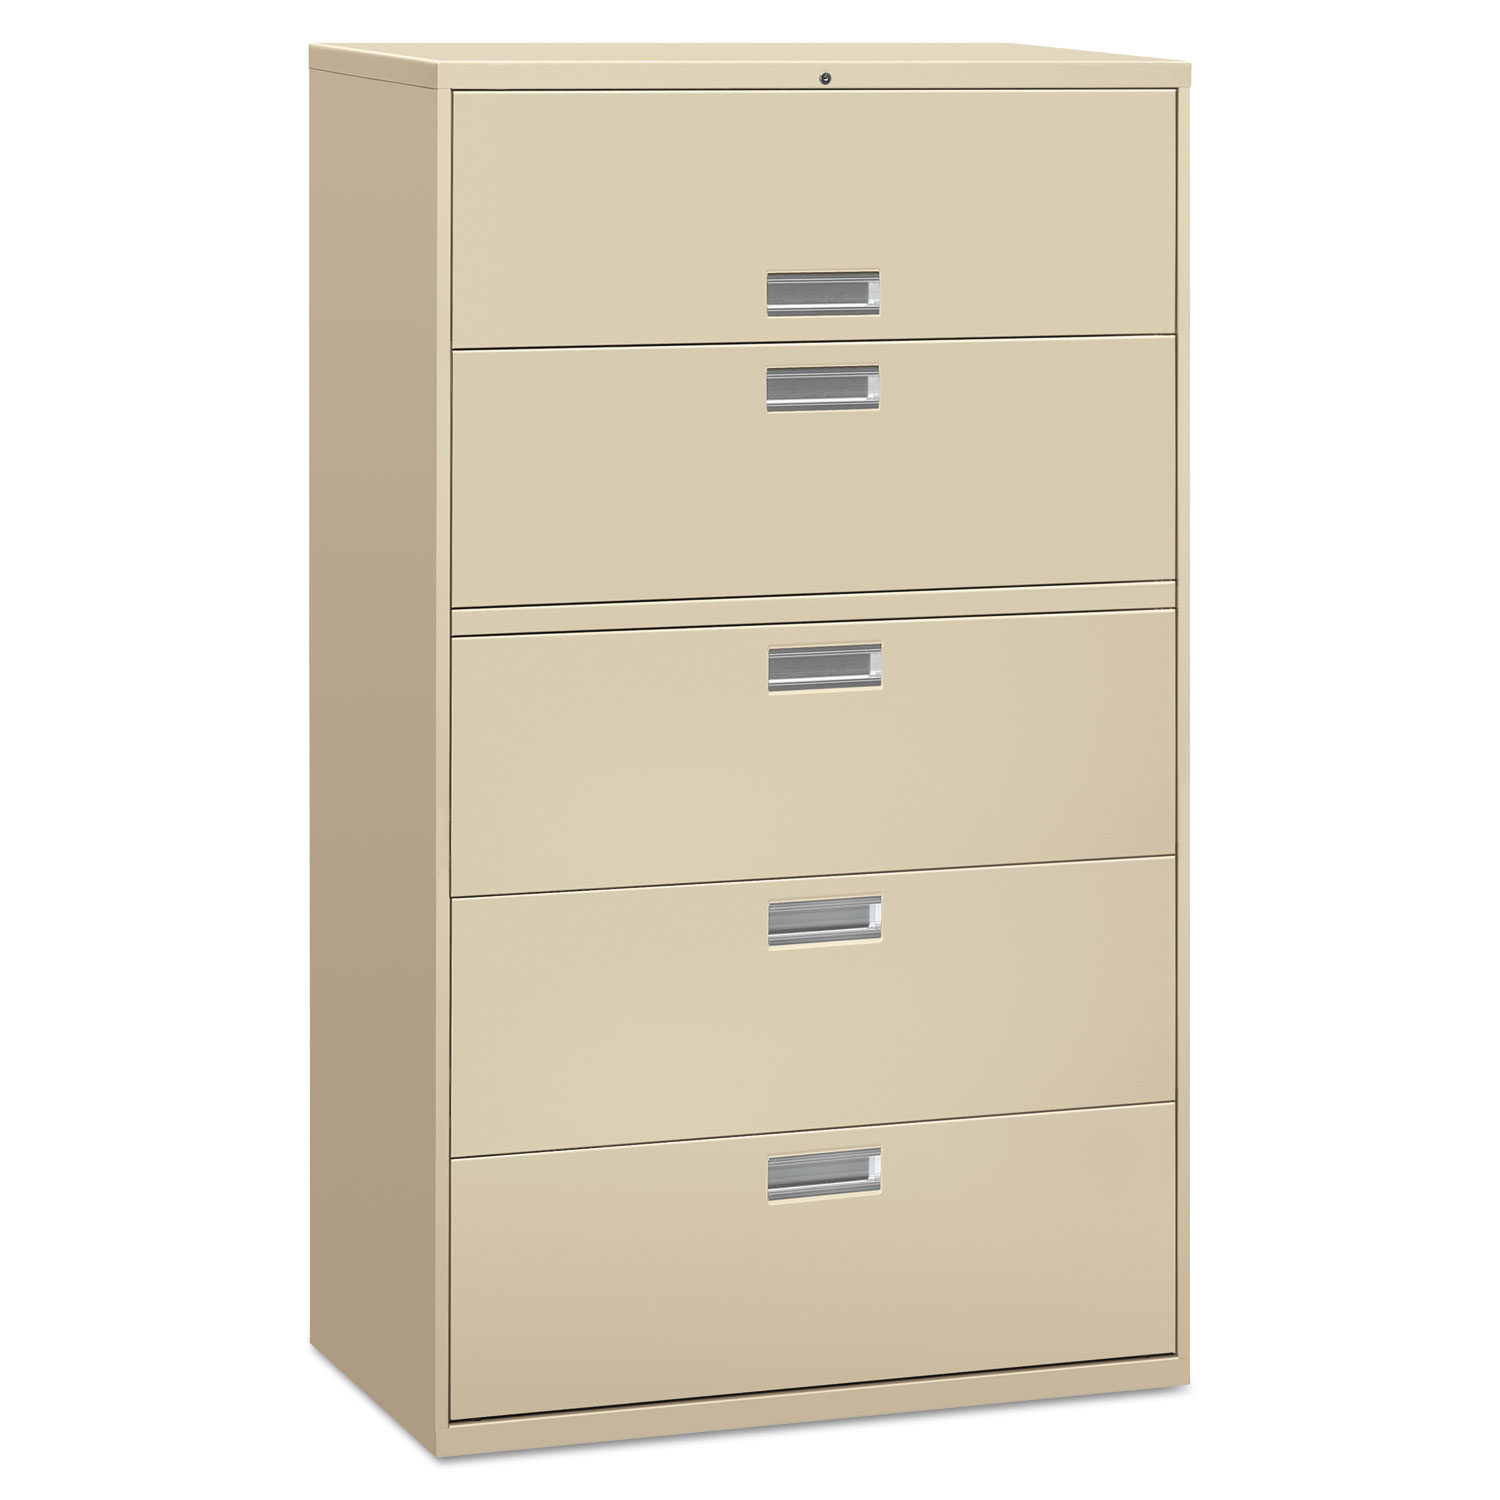 Alera Four-drawer Lateral File Cabinet, 42w X 18d X 52.5h, Charcoal - image 2 of 2